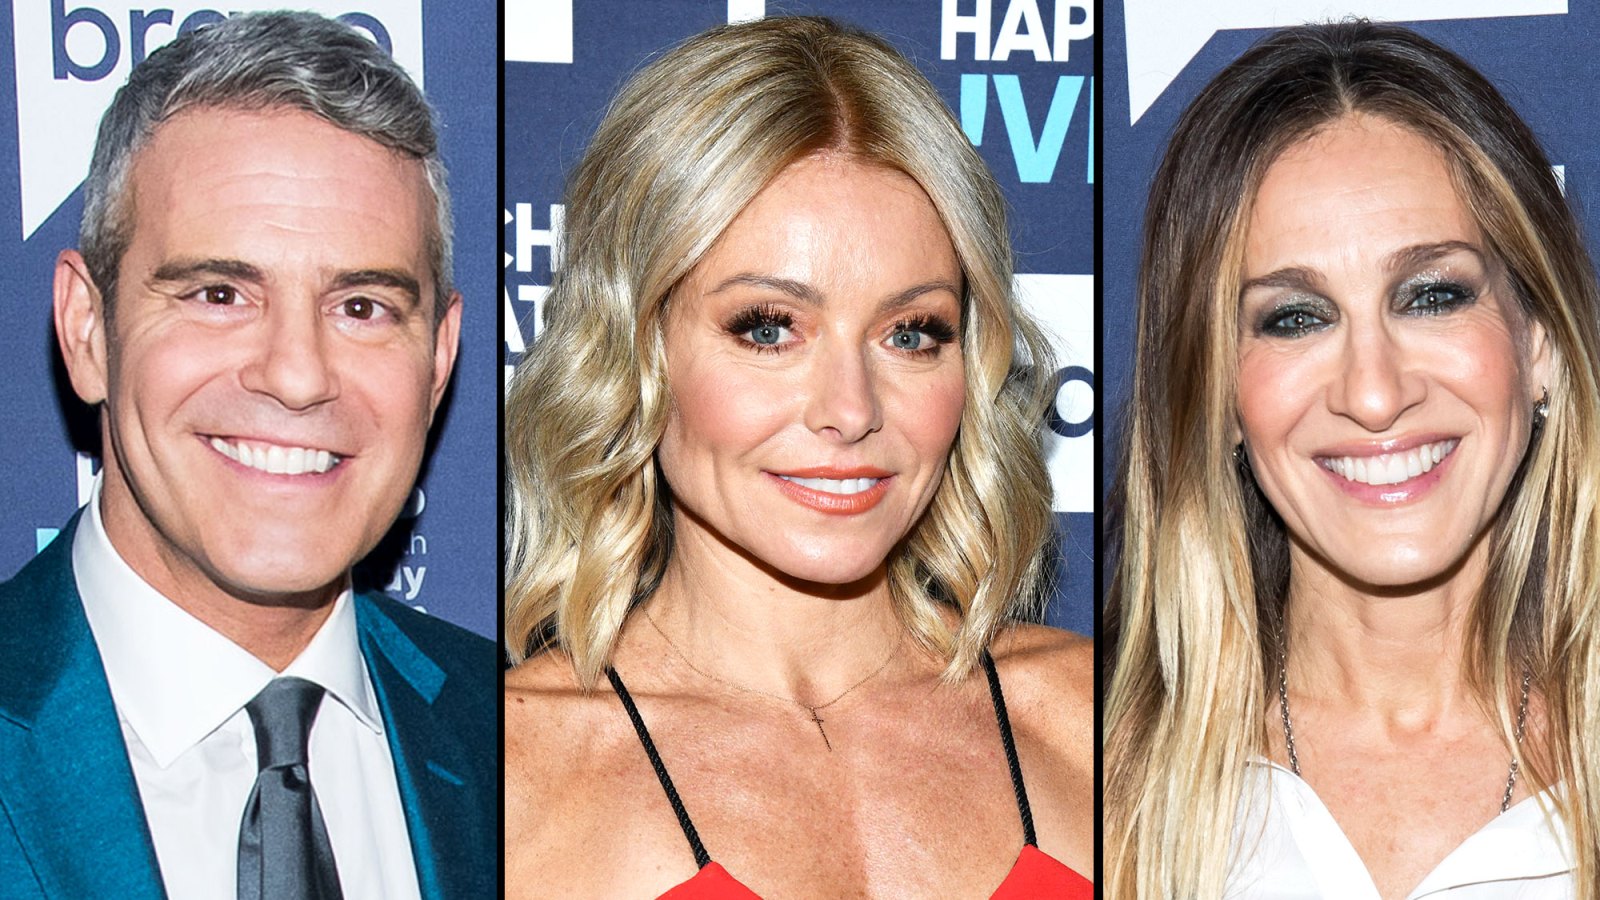 Andy Cohen Has ‘Equally Epic’ East Coast Baby Shower With Kelly Ripa and Sarah Jessica Parker